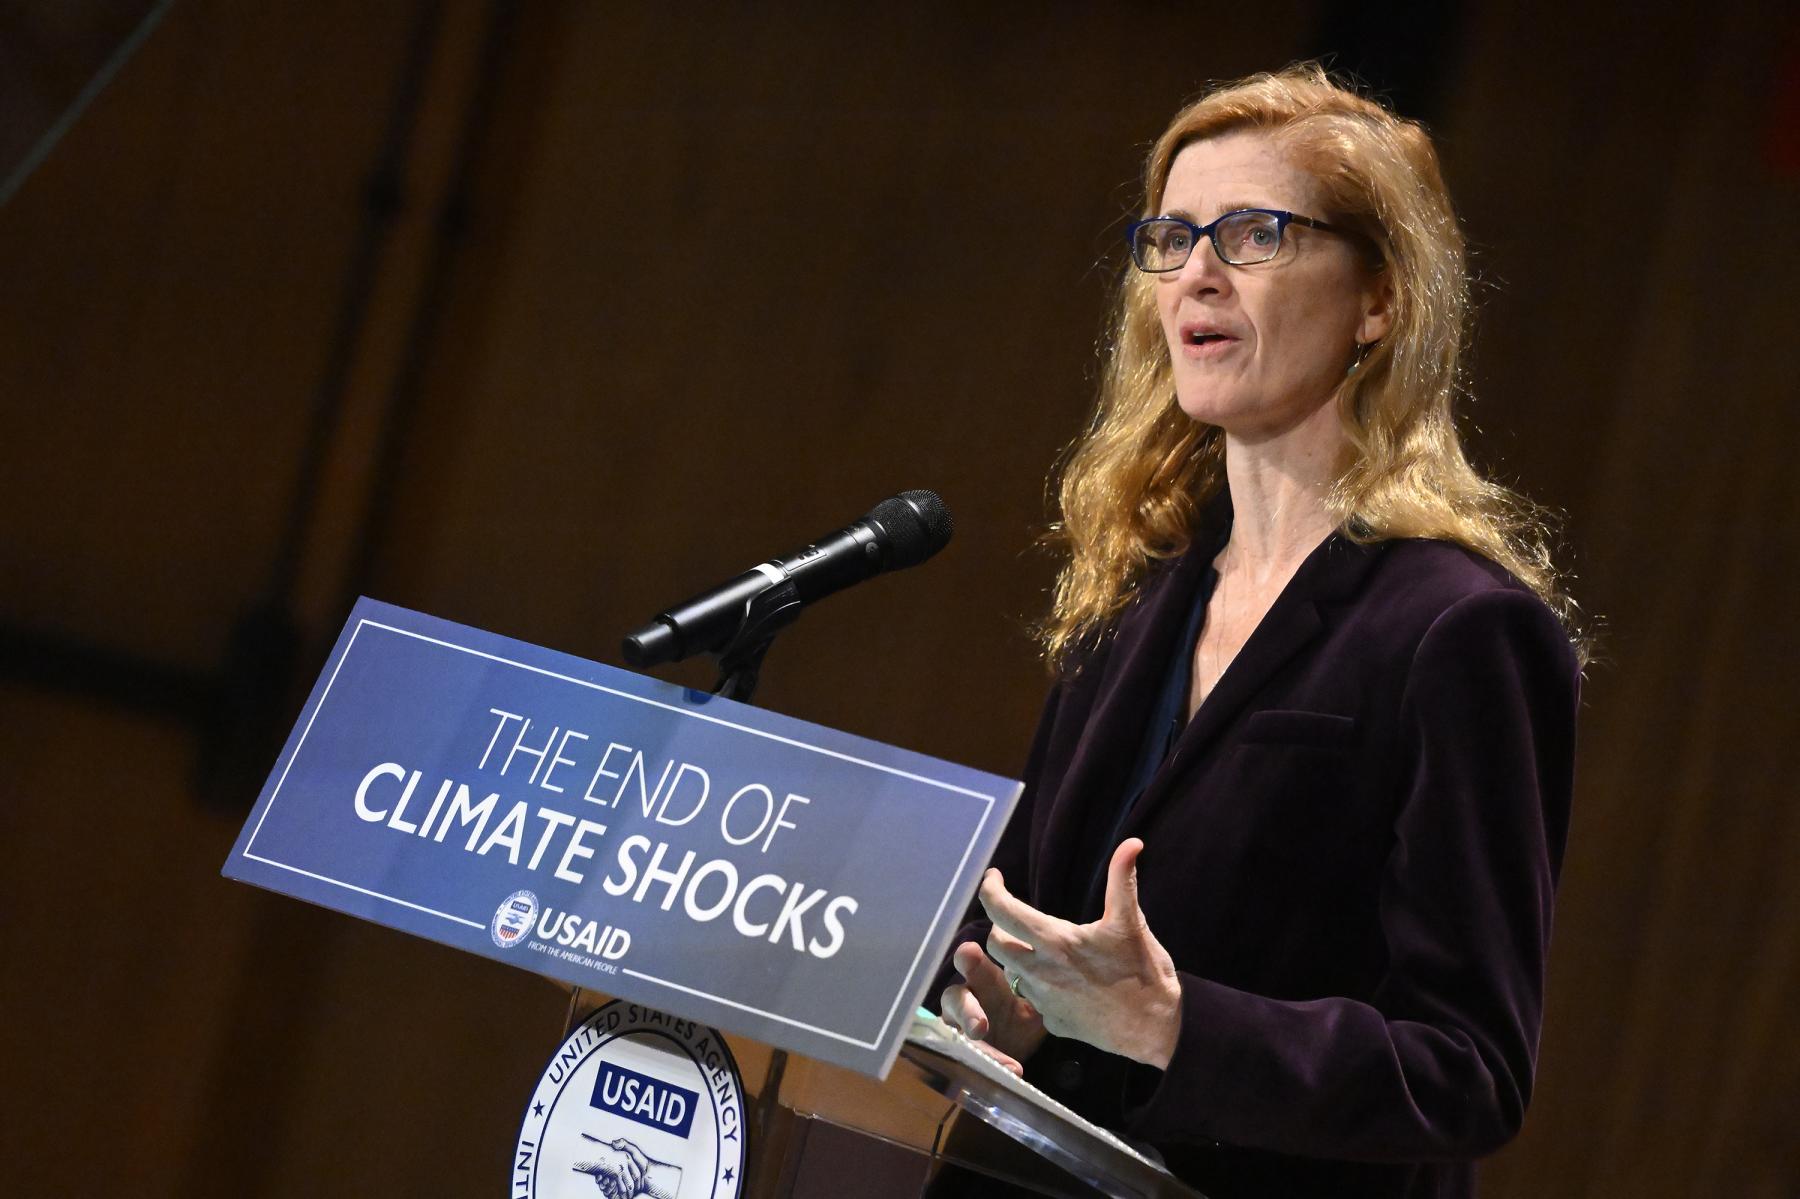 Samantha Power urges major investments in climate resilience before it’s too late